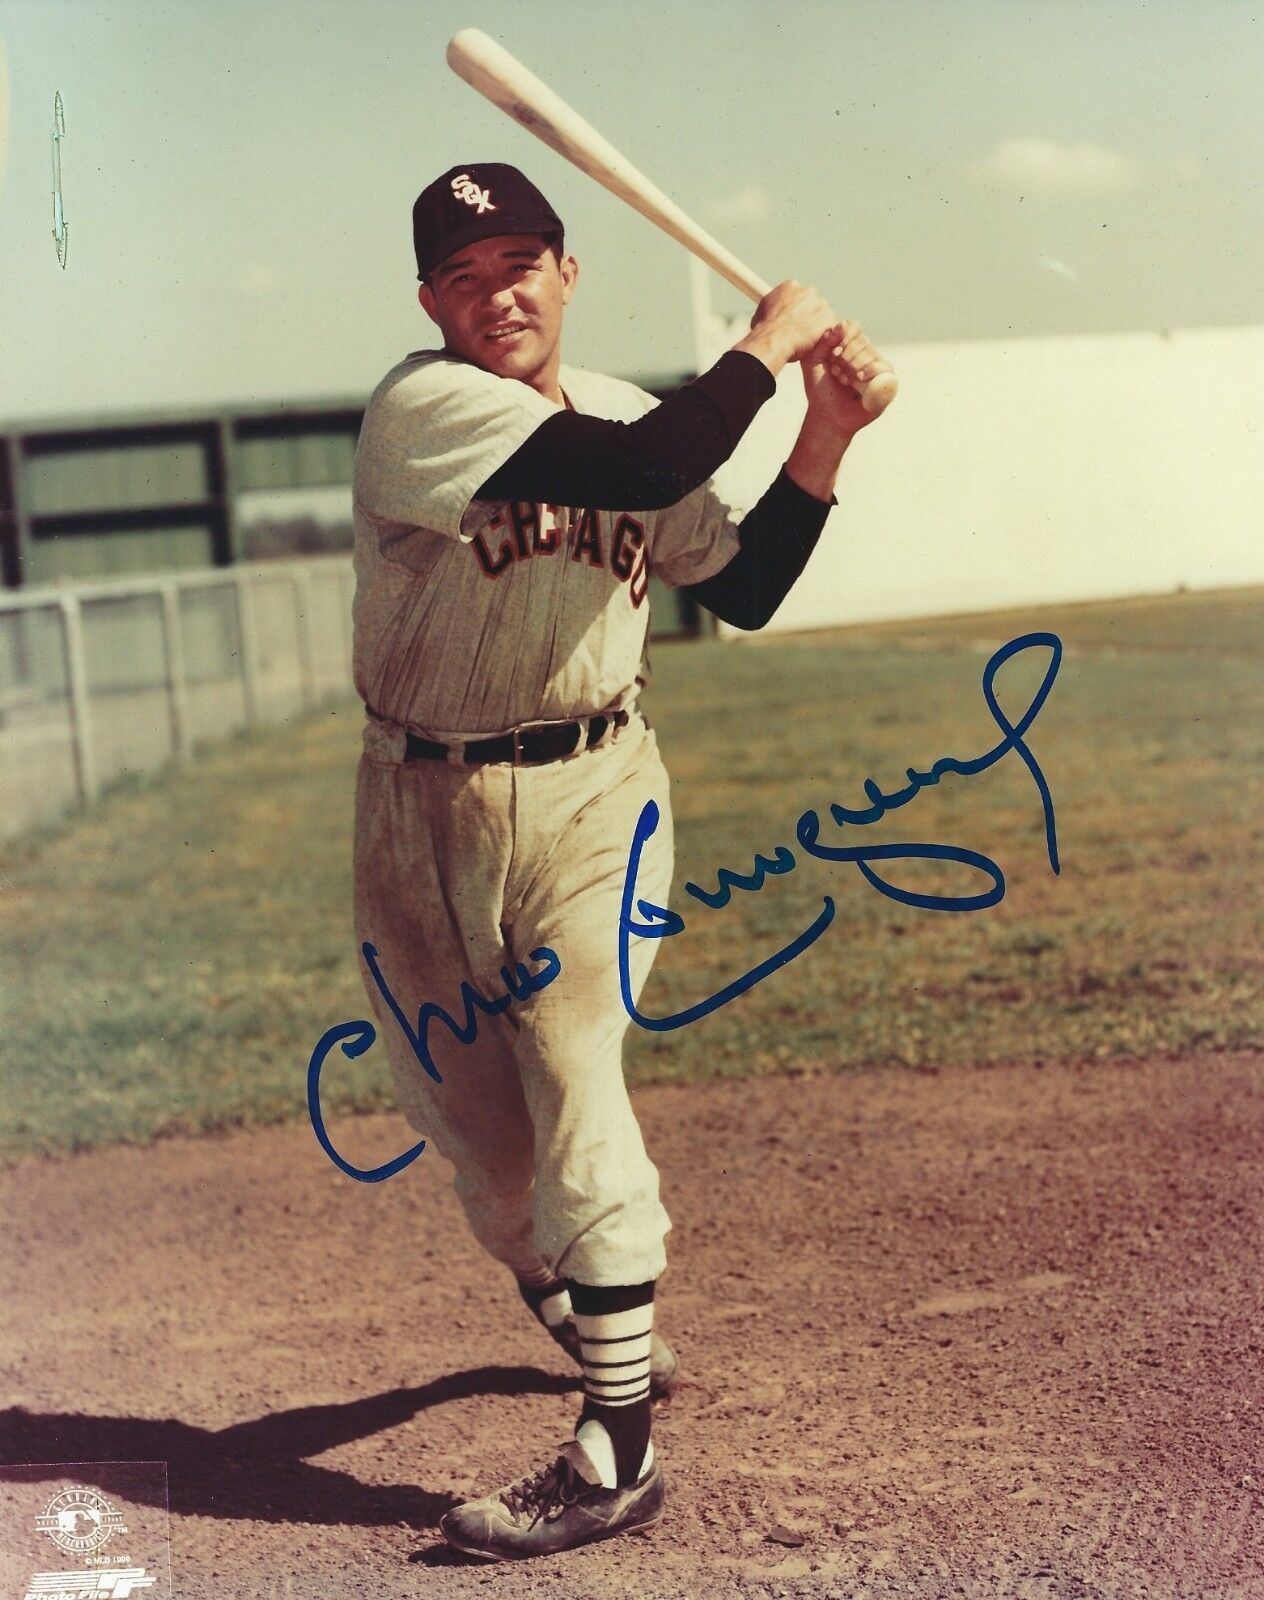 Autographed 8x10 CHICO CARRASQUEL Chicago White Sox Photo Poster painting - COA